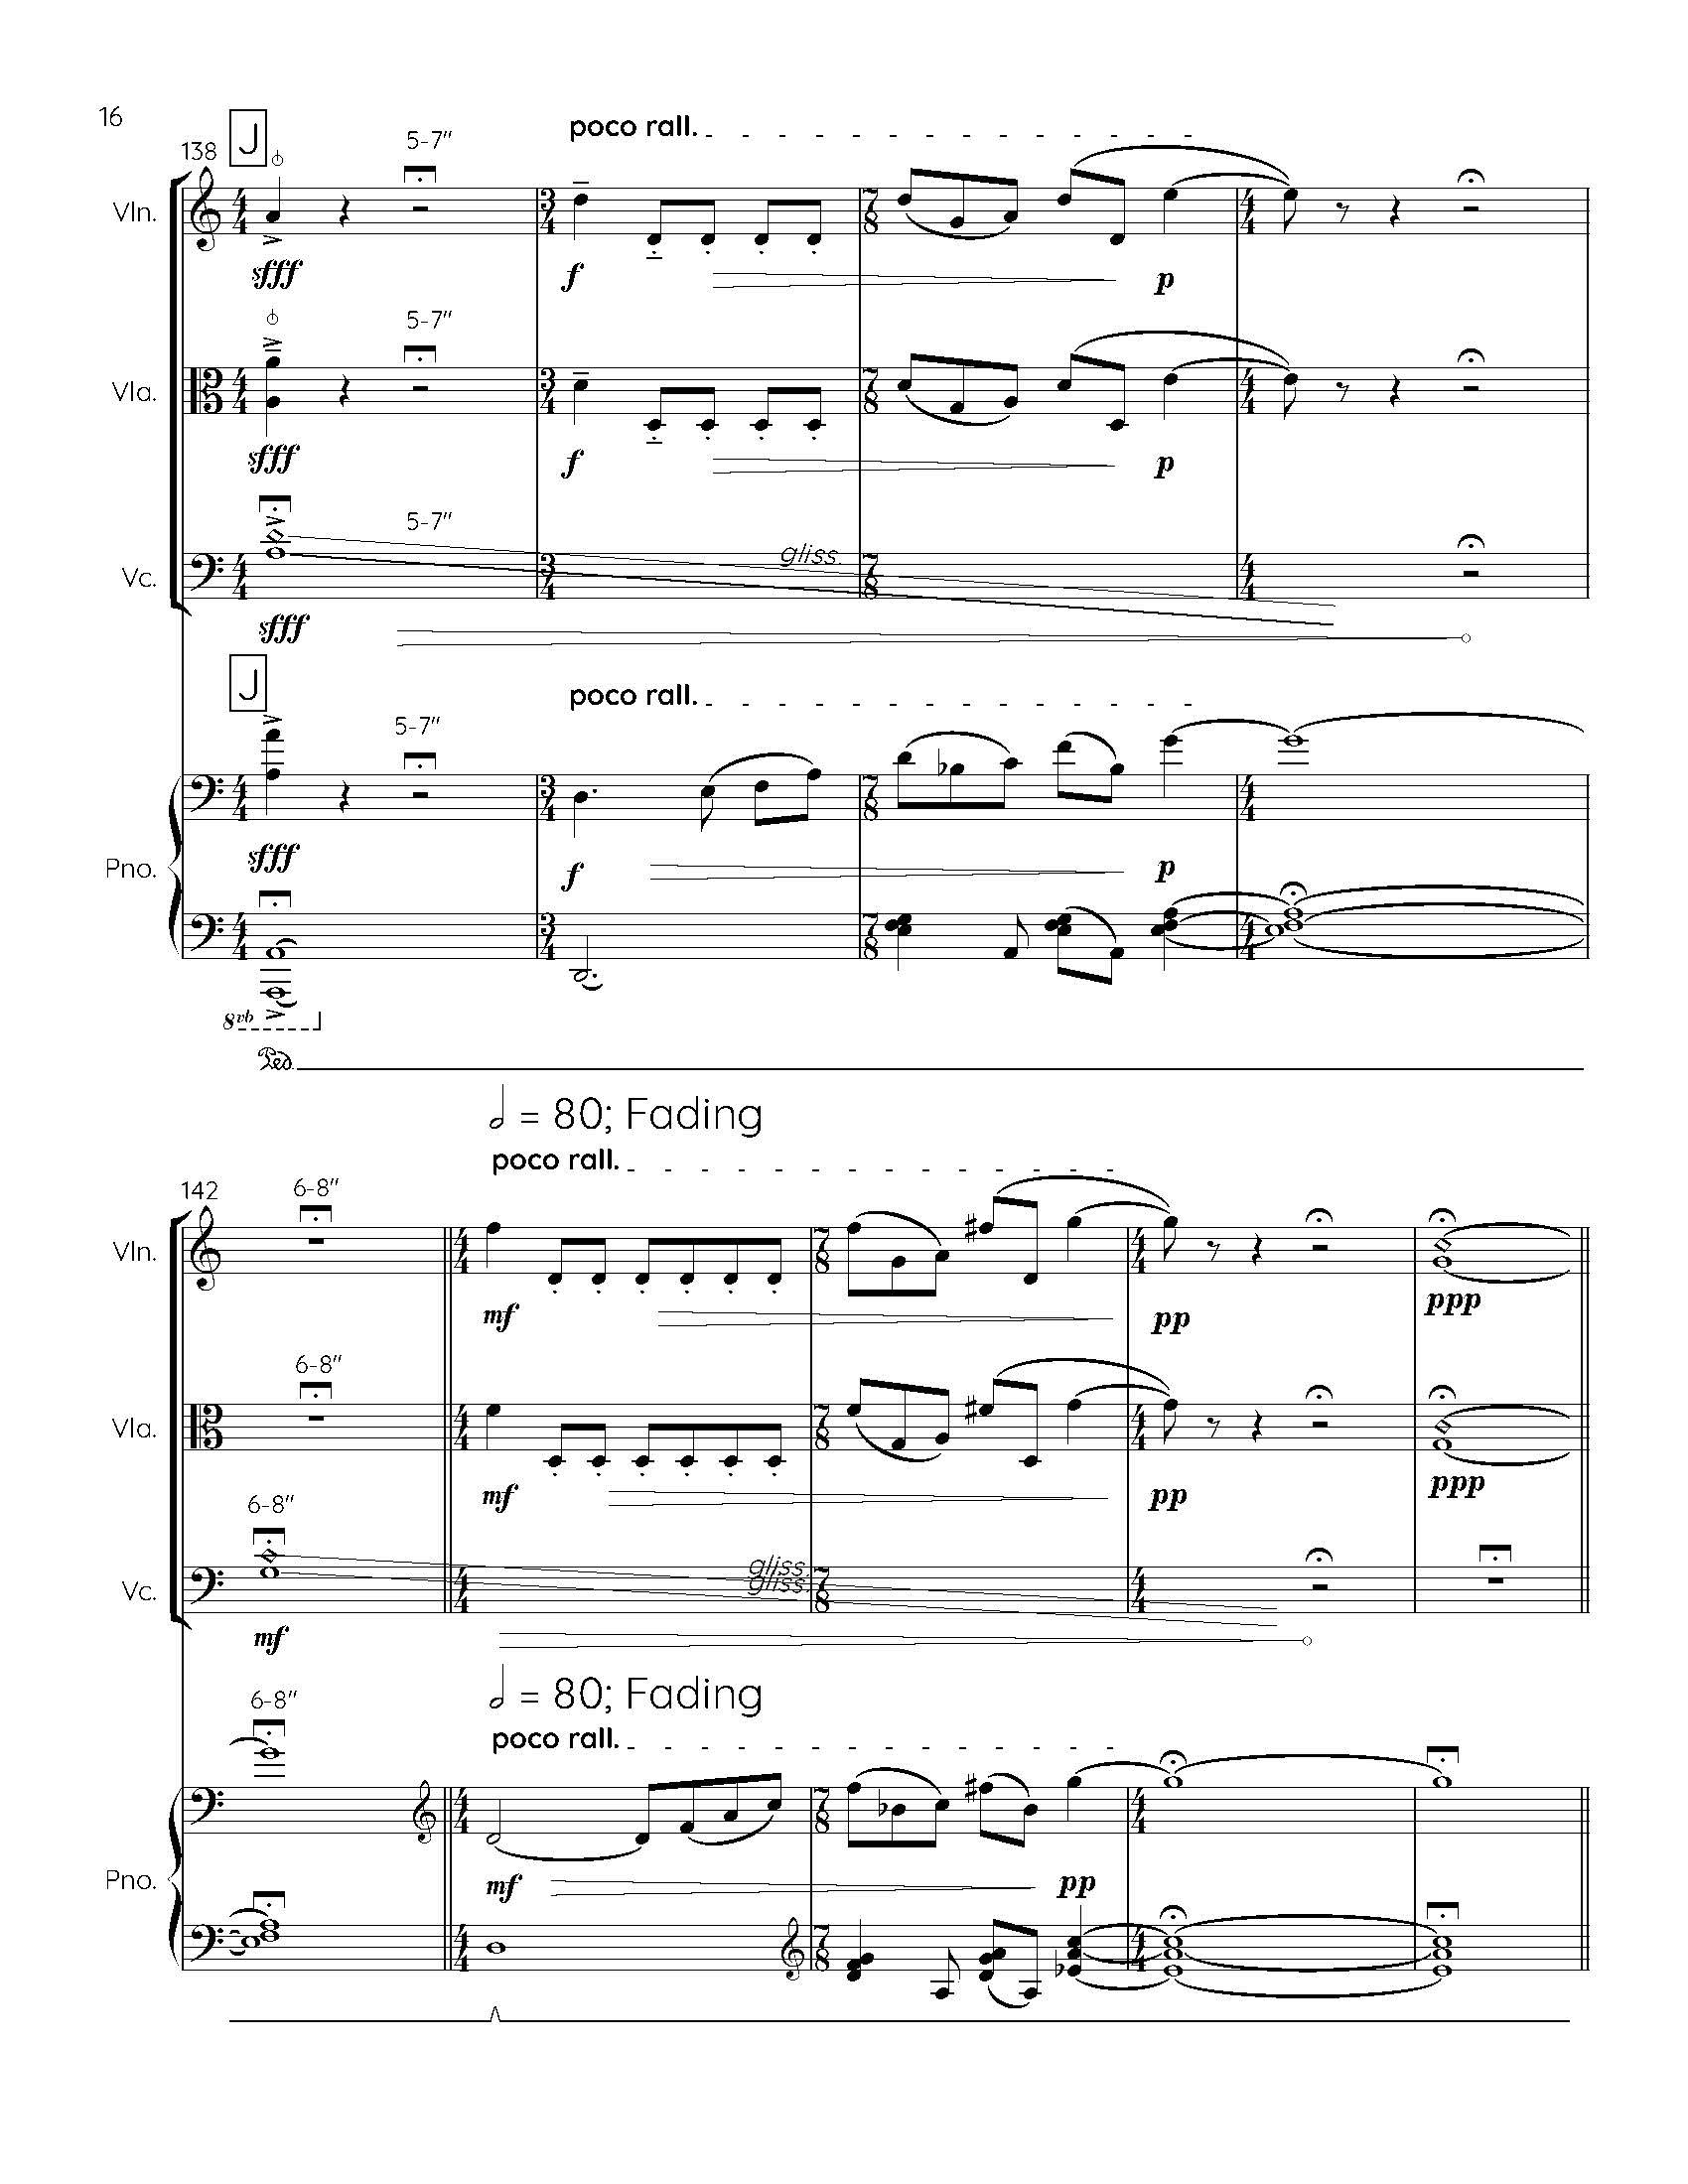 I S L A N D I - Complete Score_Page_22.jpg